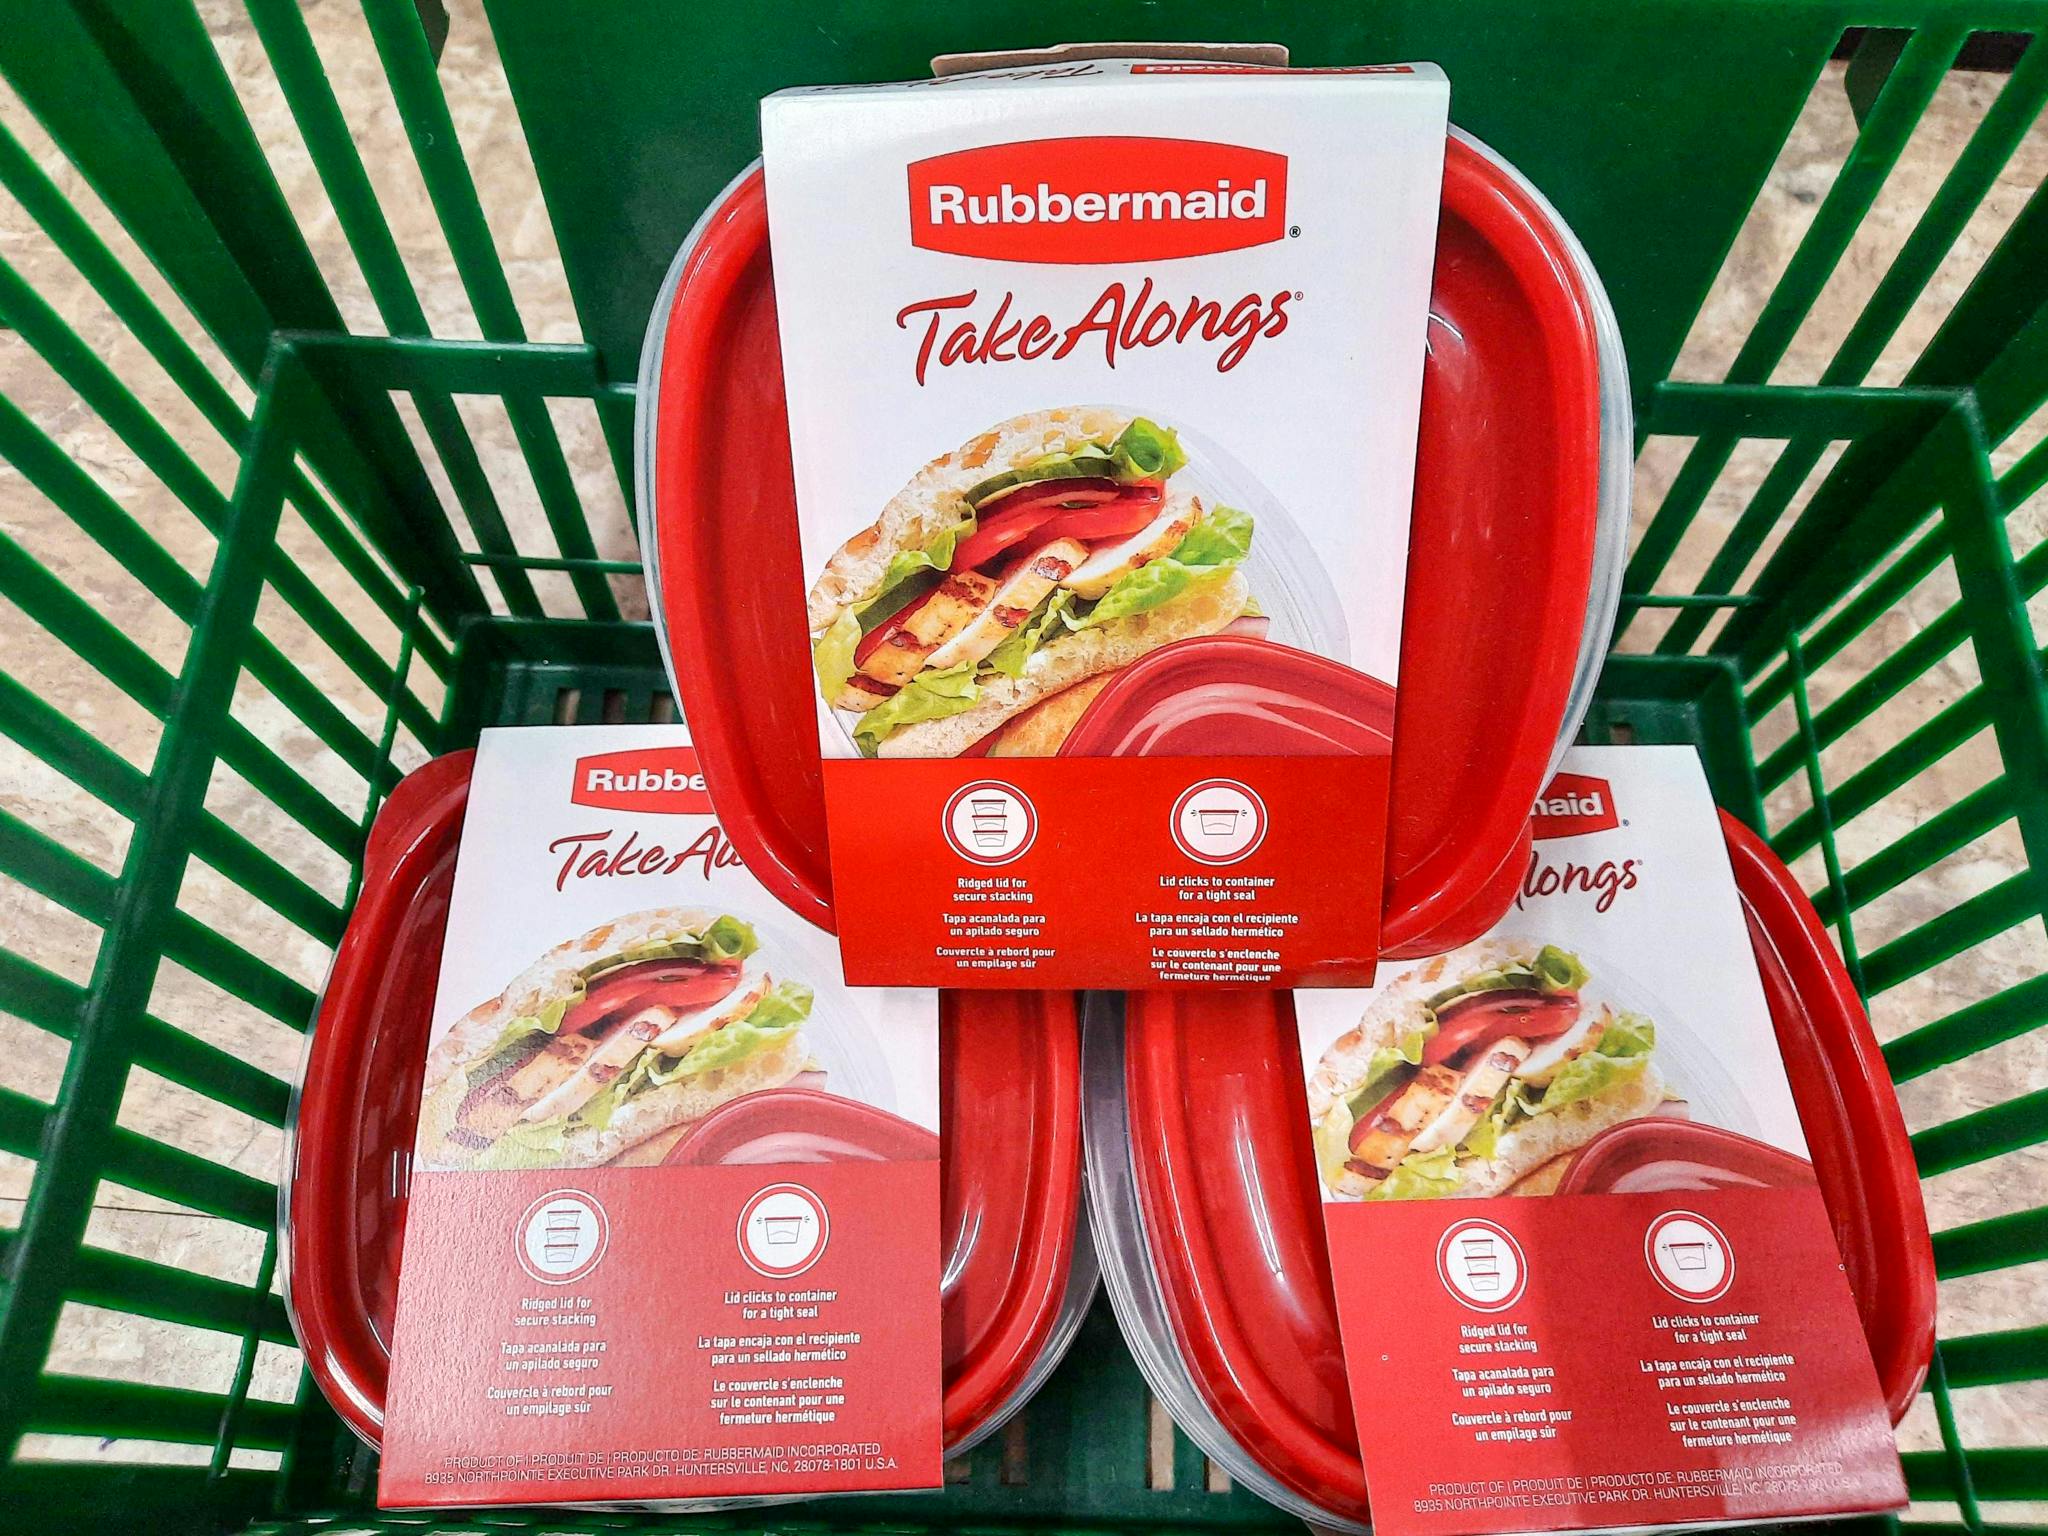 Rubbermaid Take Alongs Food Storage Containers in Dollar Tree shopping basket